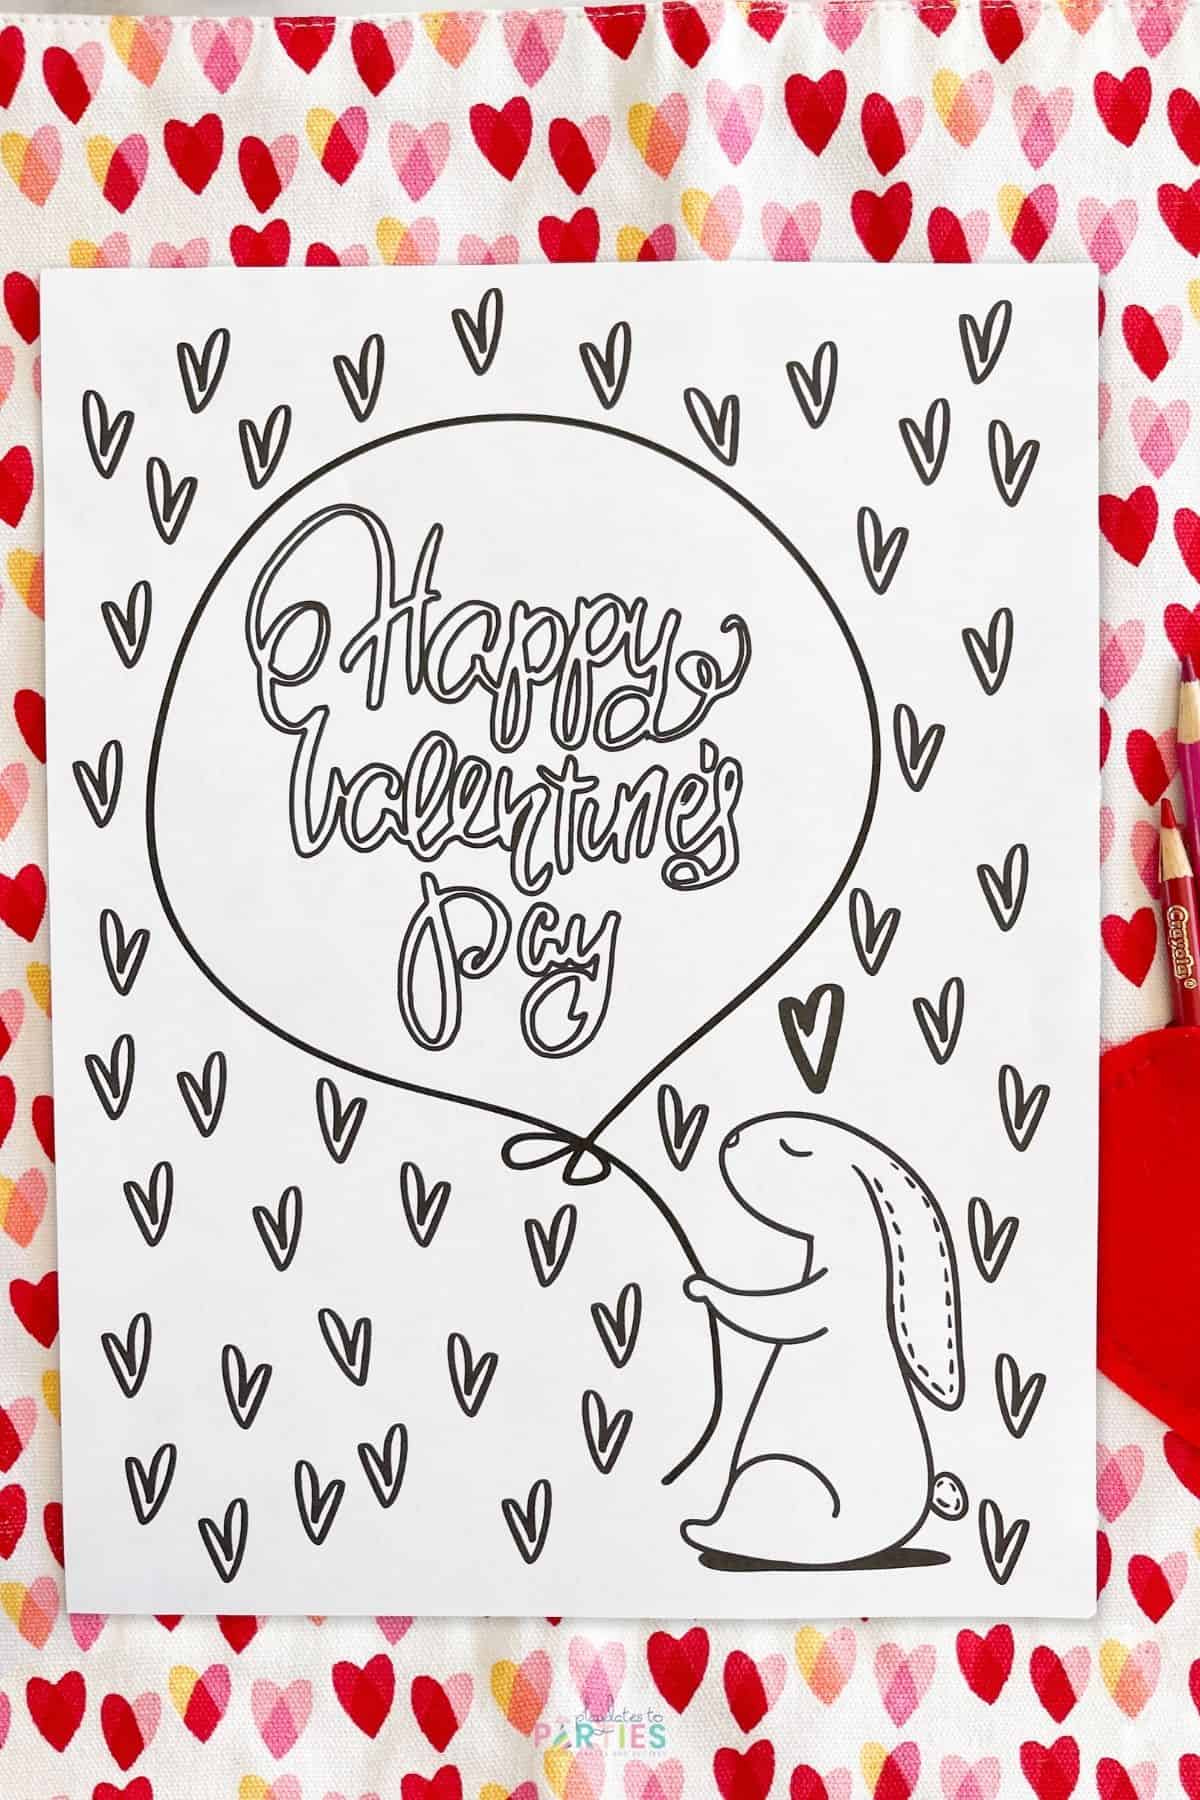 A blank coloring page that says Happy Valentine's Day on a balloon held by a bunny.